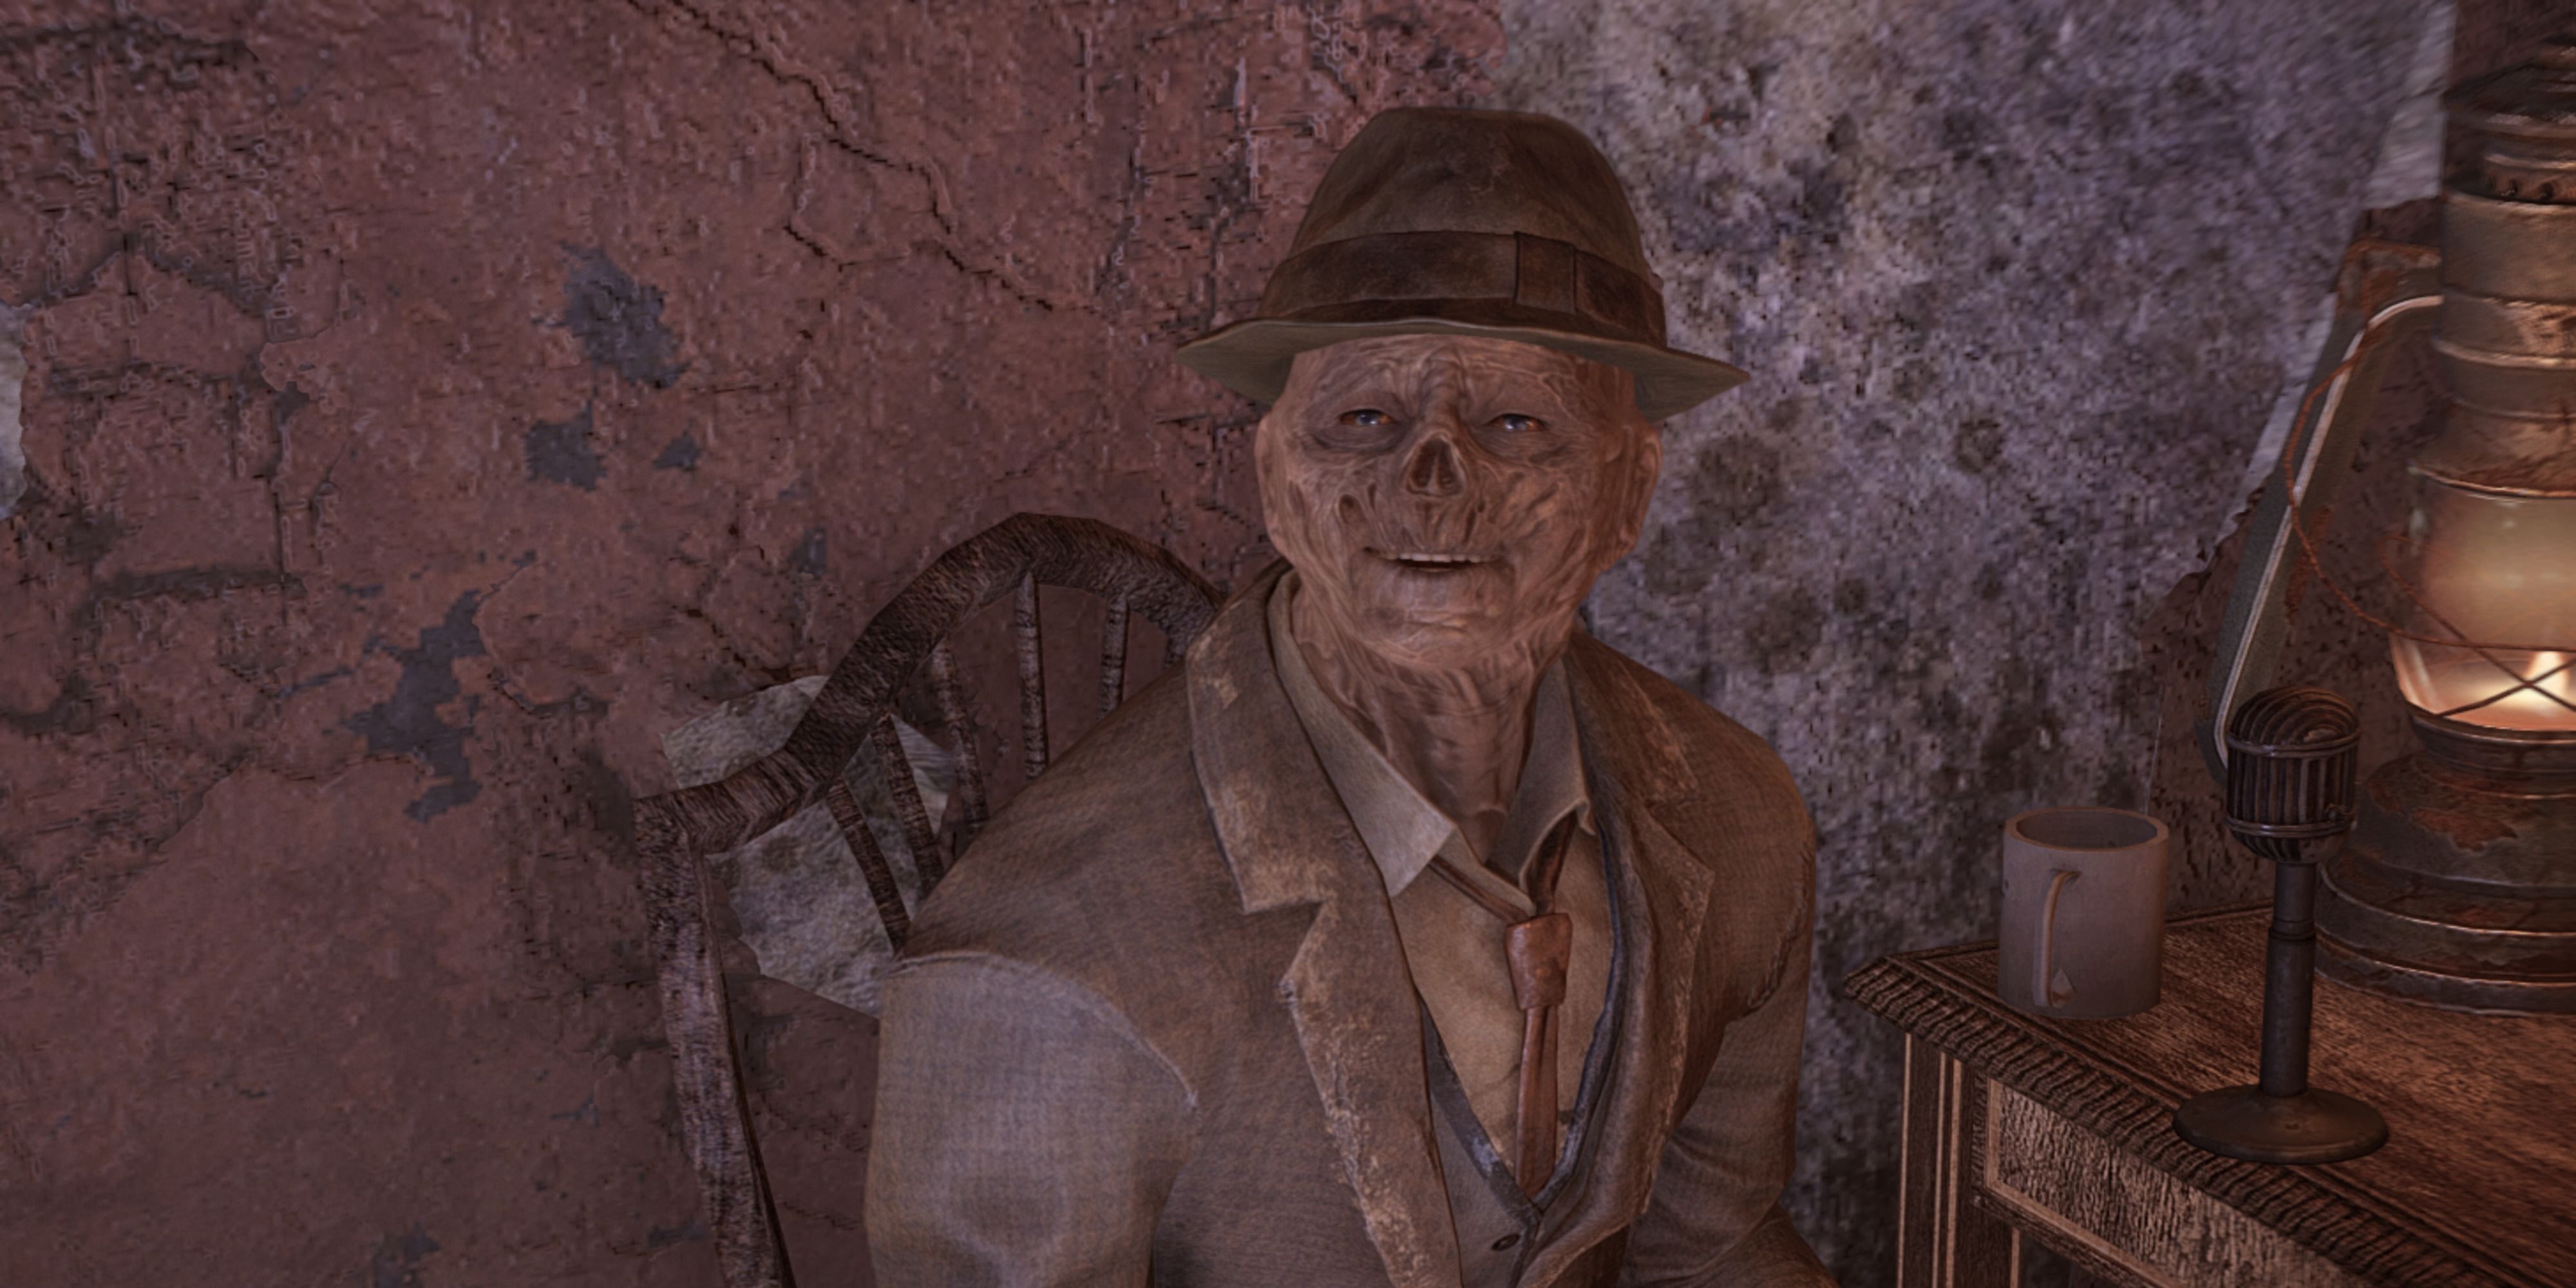 Speaking to Kent Connolly about the Silver Shroud in Fallout 4.